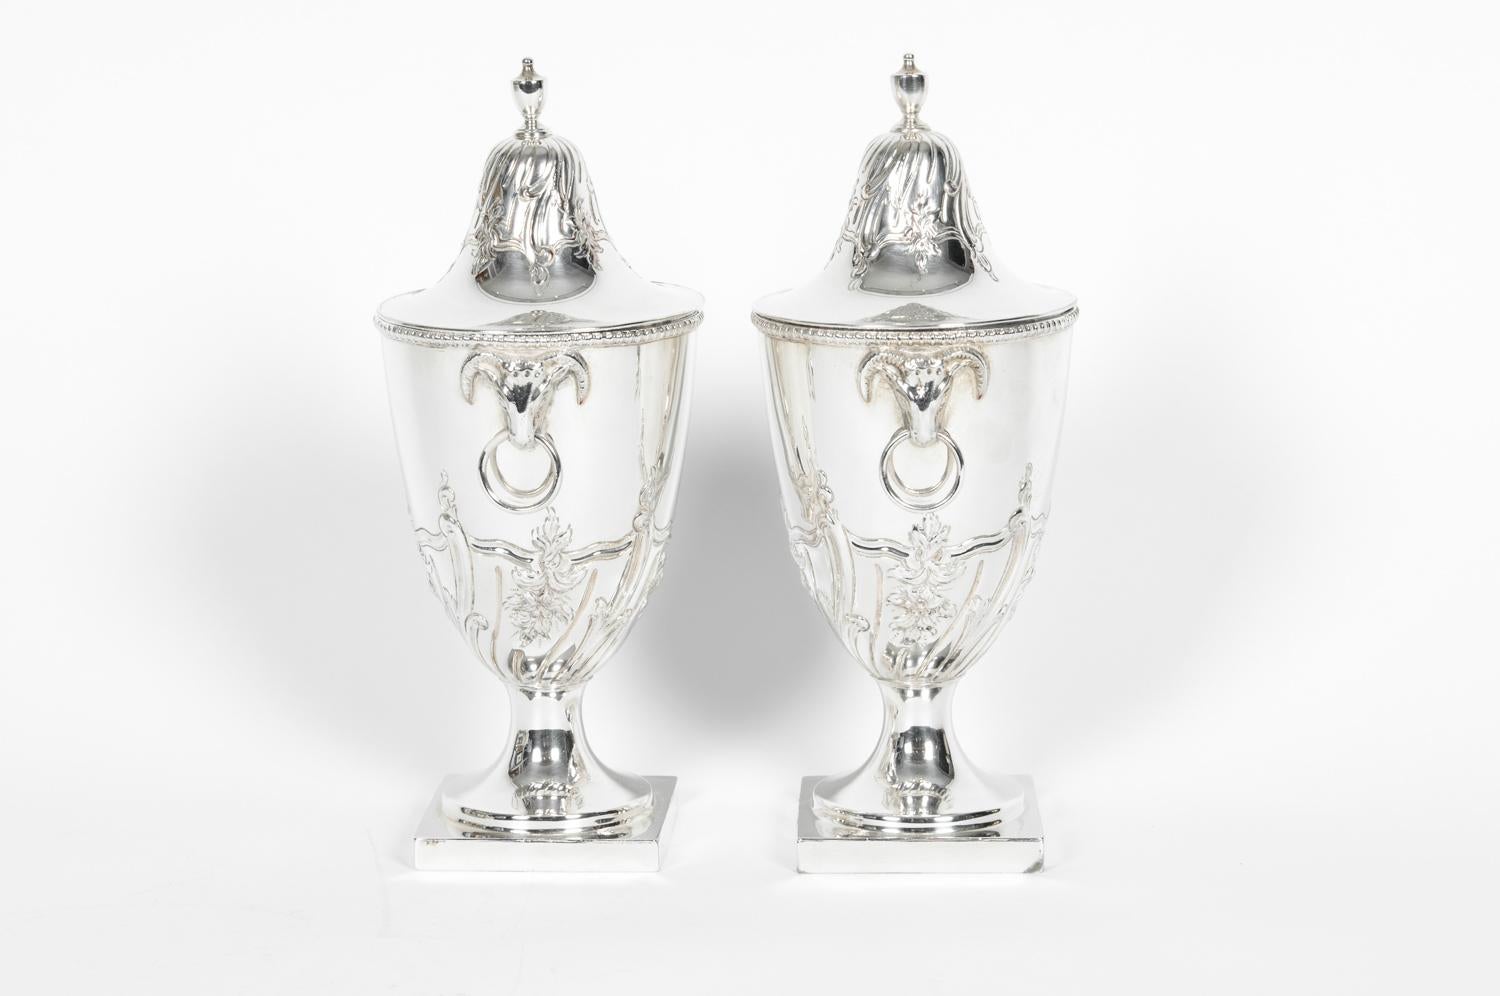 Old English Sheffield silver plate / copper pair of covered urns or vases. Each vase / urn is in excellent antique condition. Each one measure about 8.5 inches high x 4 inches diameter. Base is 2.5 inches x 2.5 inches.